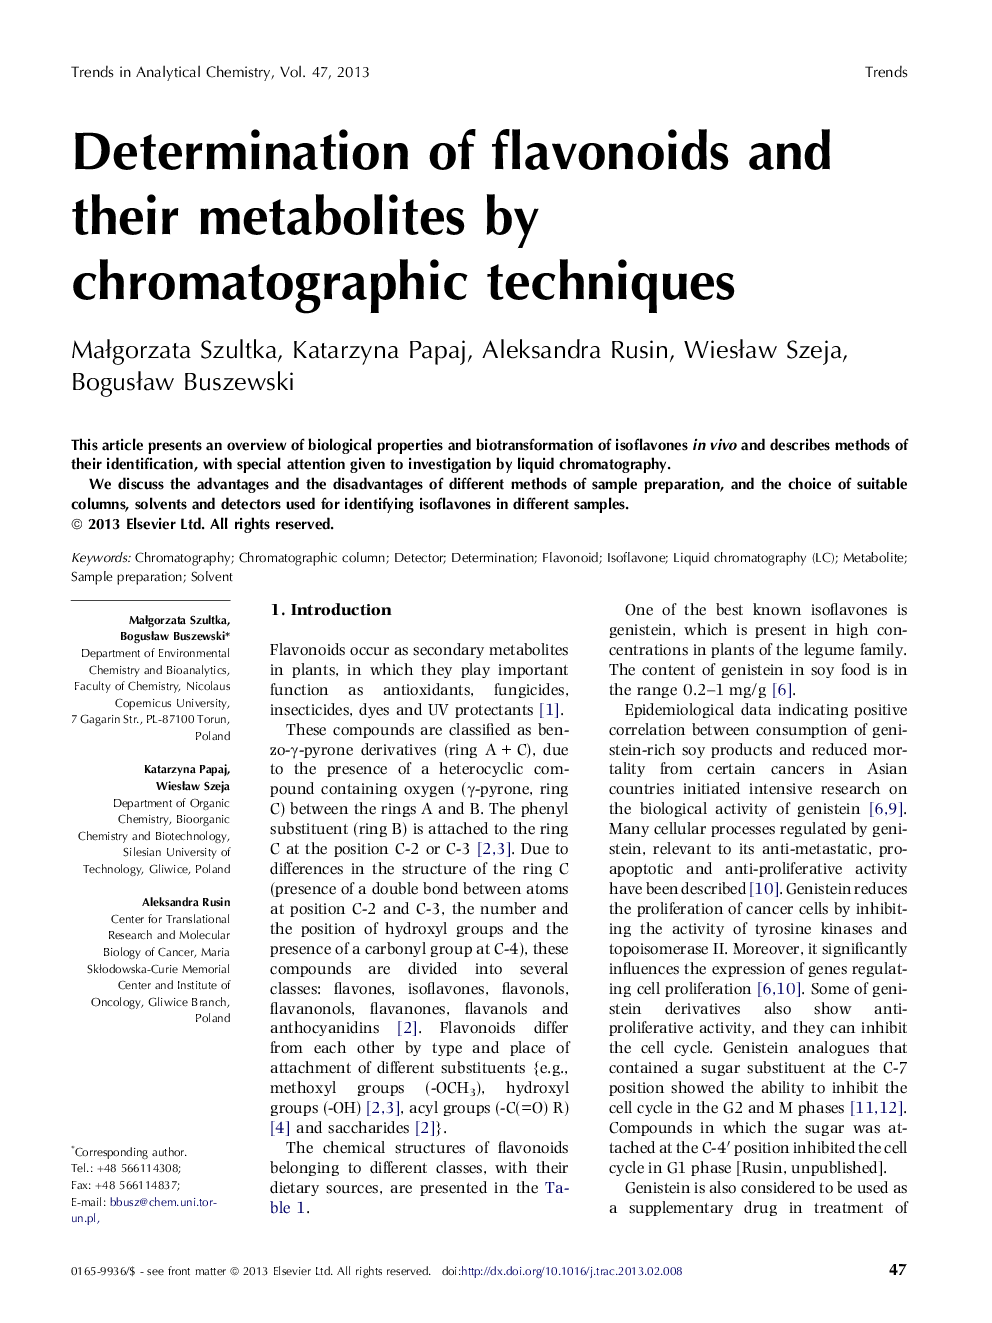 Determination of flavonoids and their metabolites by chromatographic techniques